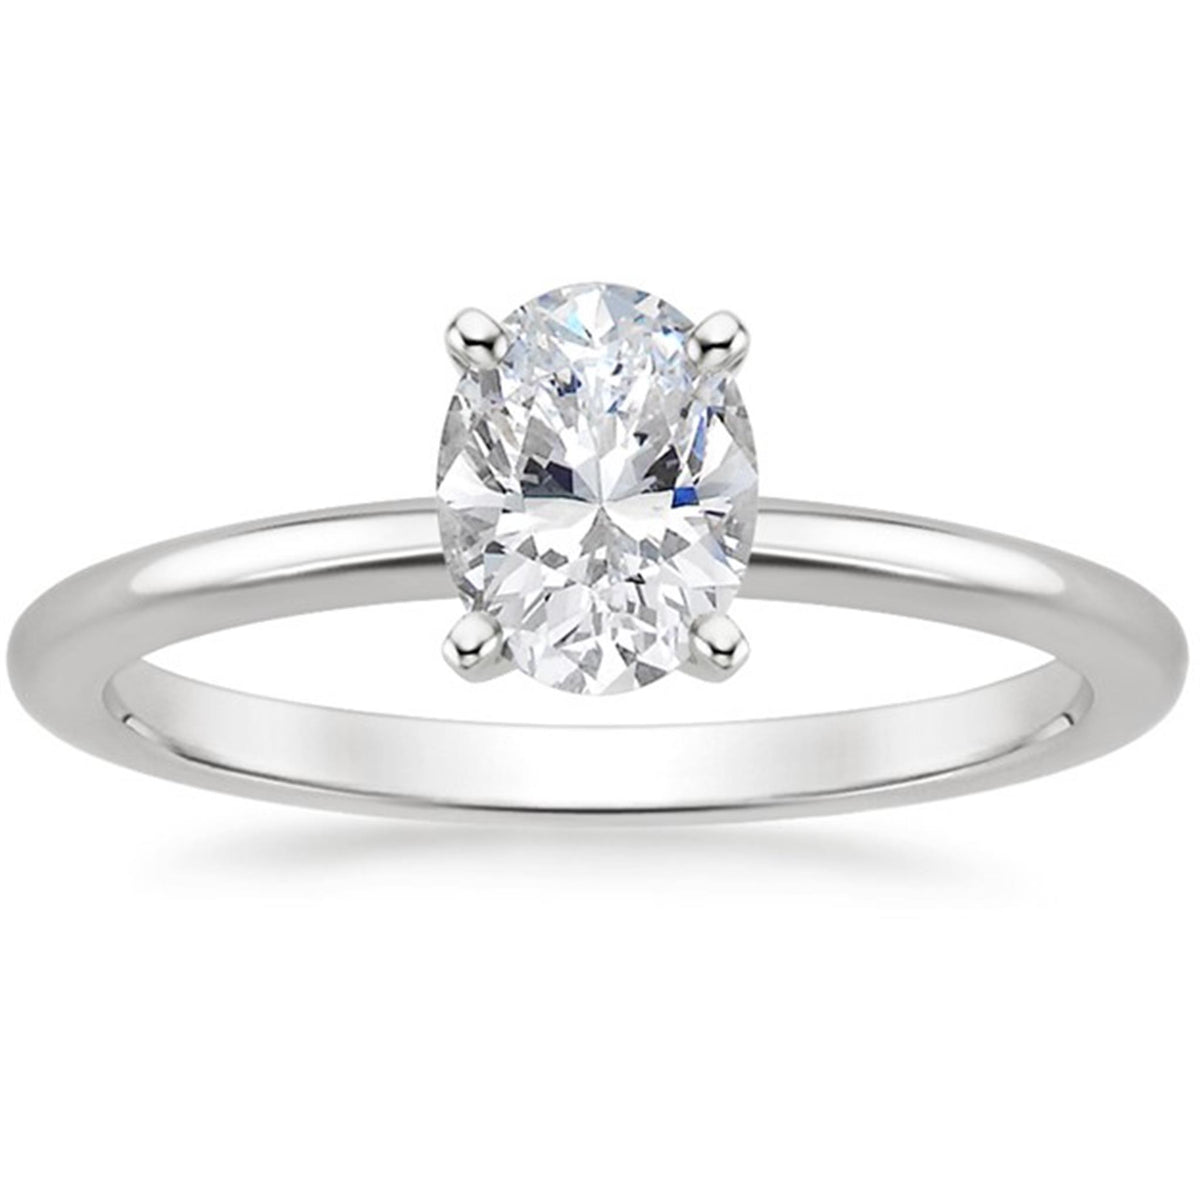 14Kt White Gold Solitaire Solitaire Ring With 1.11ct Oval  Lab-Grown Center Diamond